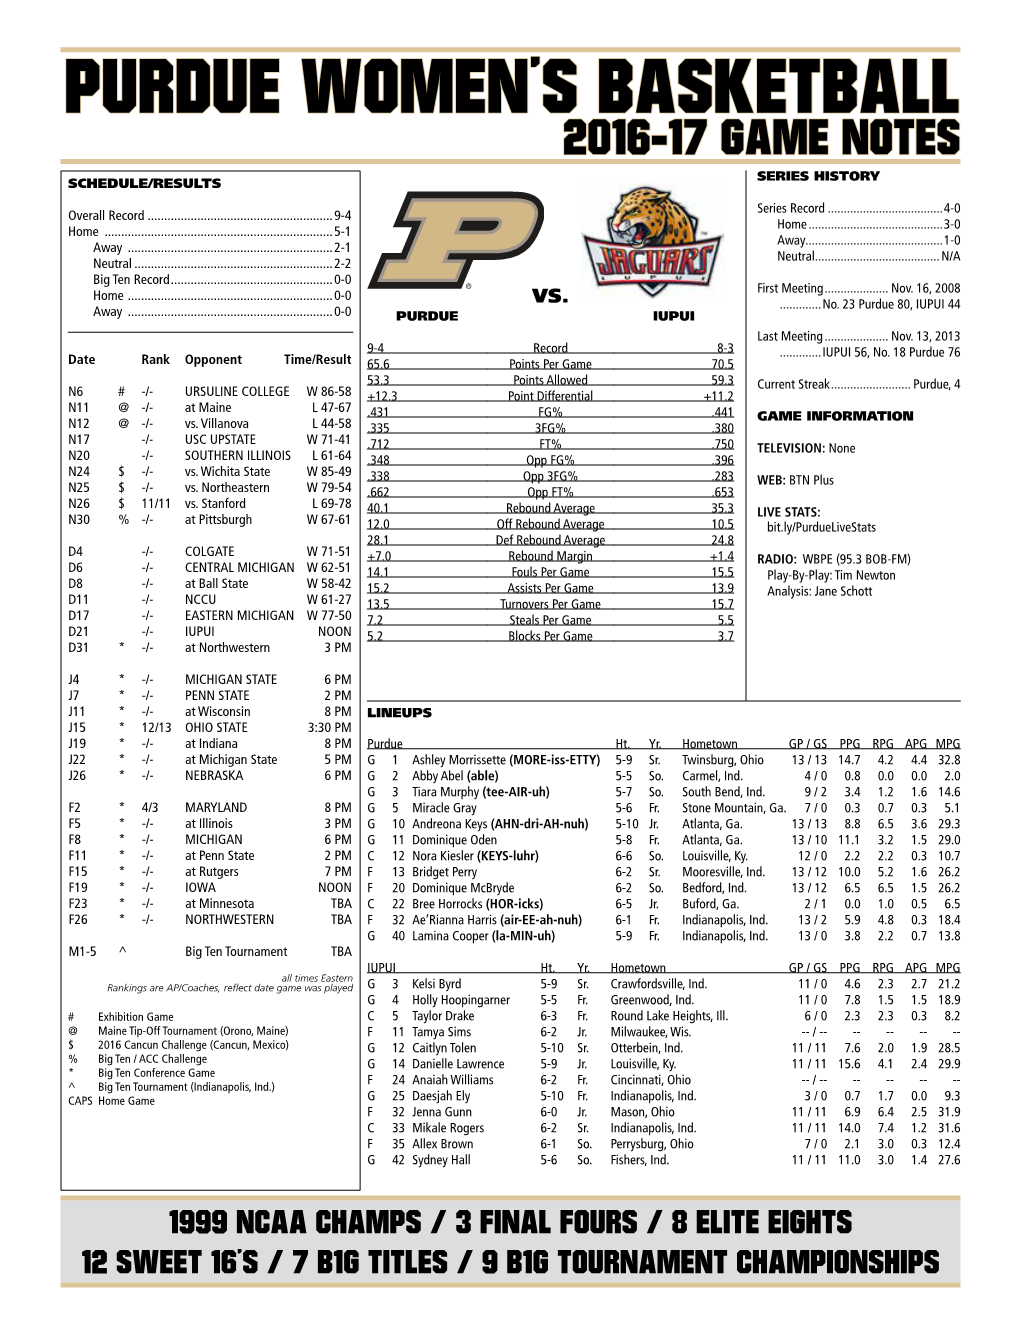 Purdue Women's Basketball Purdue Combined Team Statistics (As of Dec 17, 2016) All Games